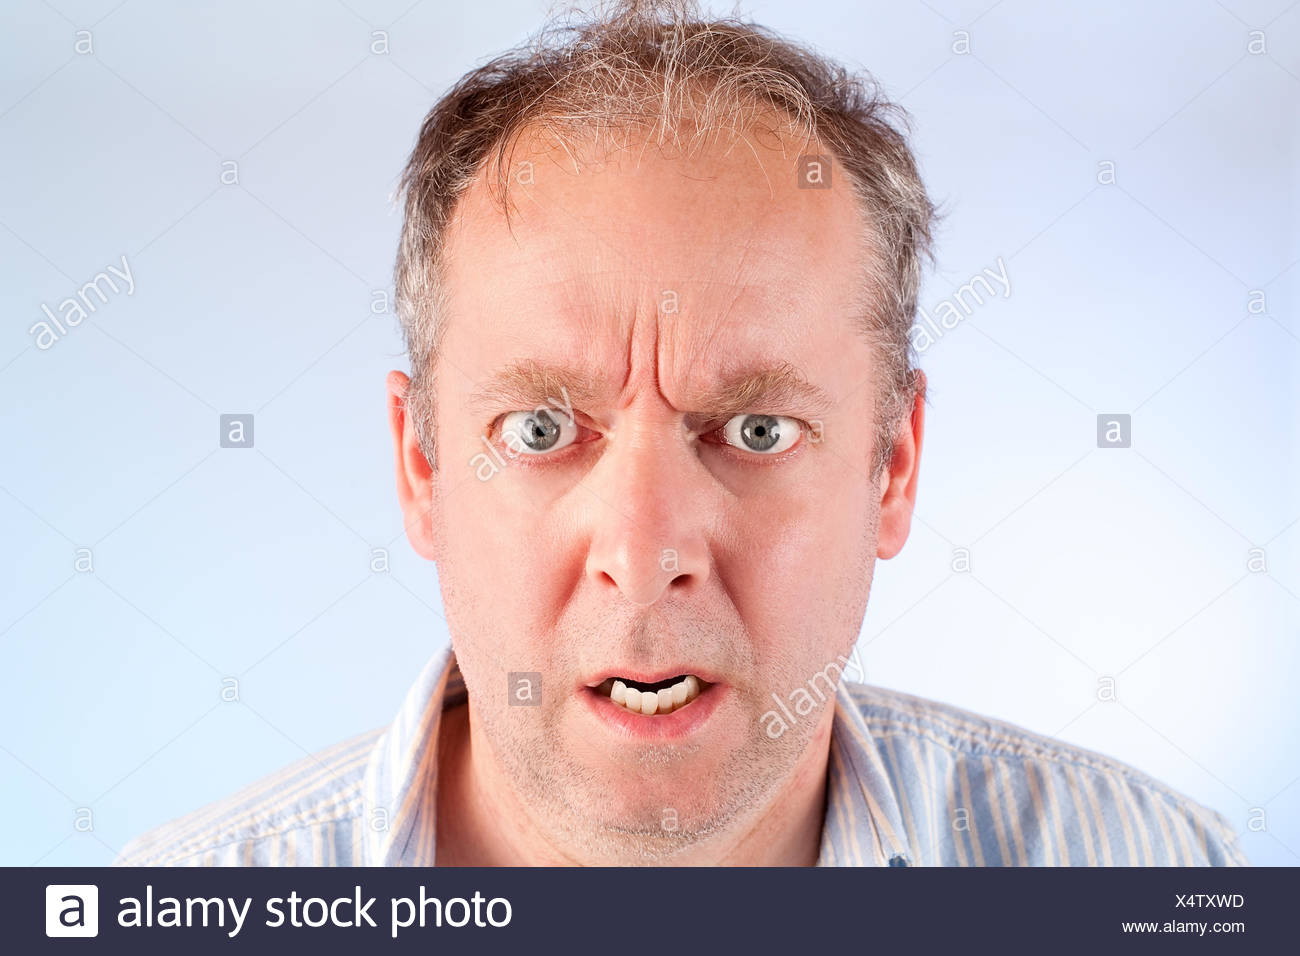 Guy Looks Mad High Resolution Stock Photography And Images Alamy